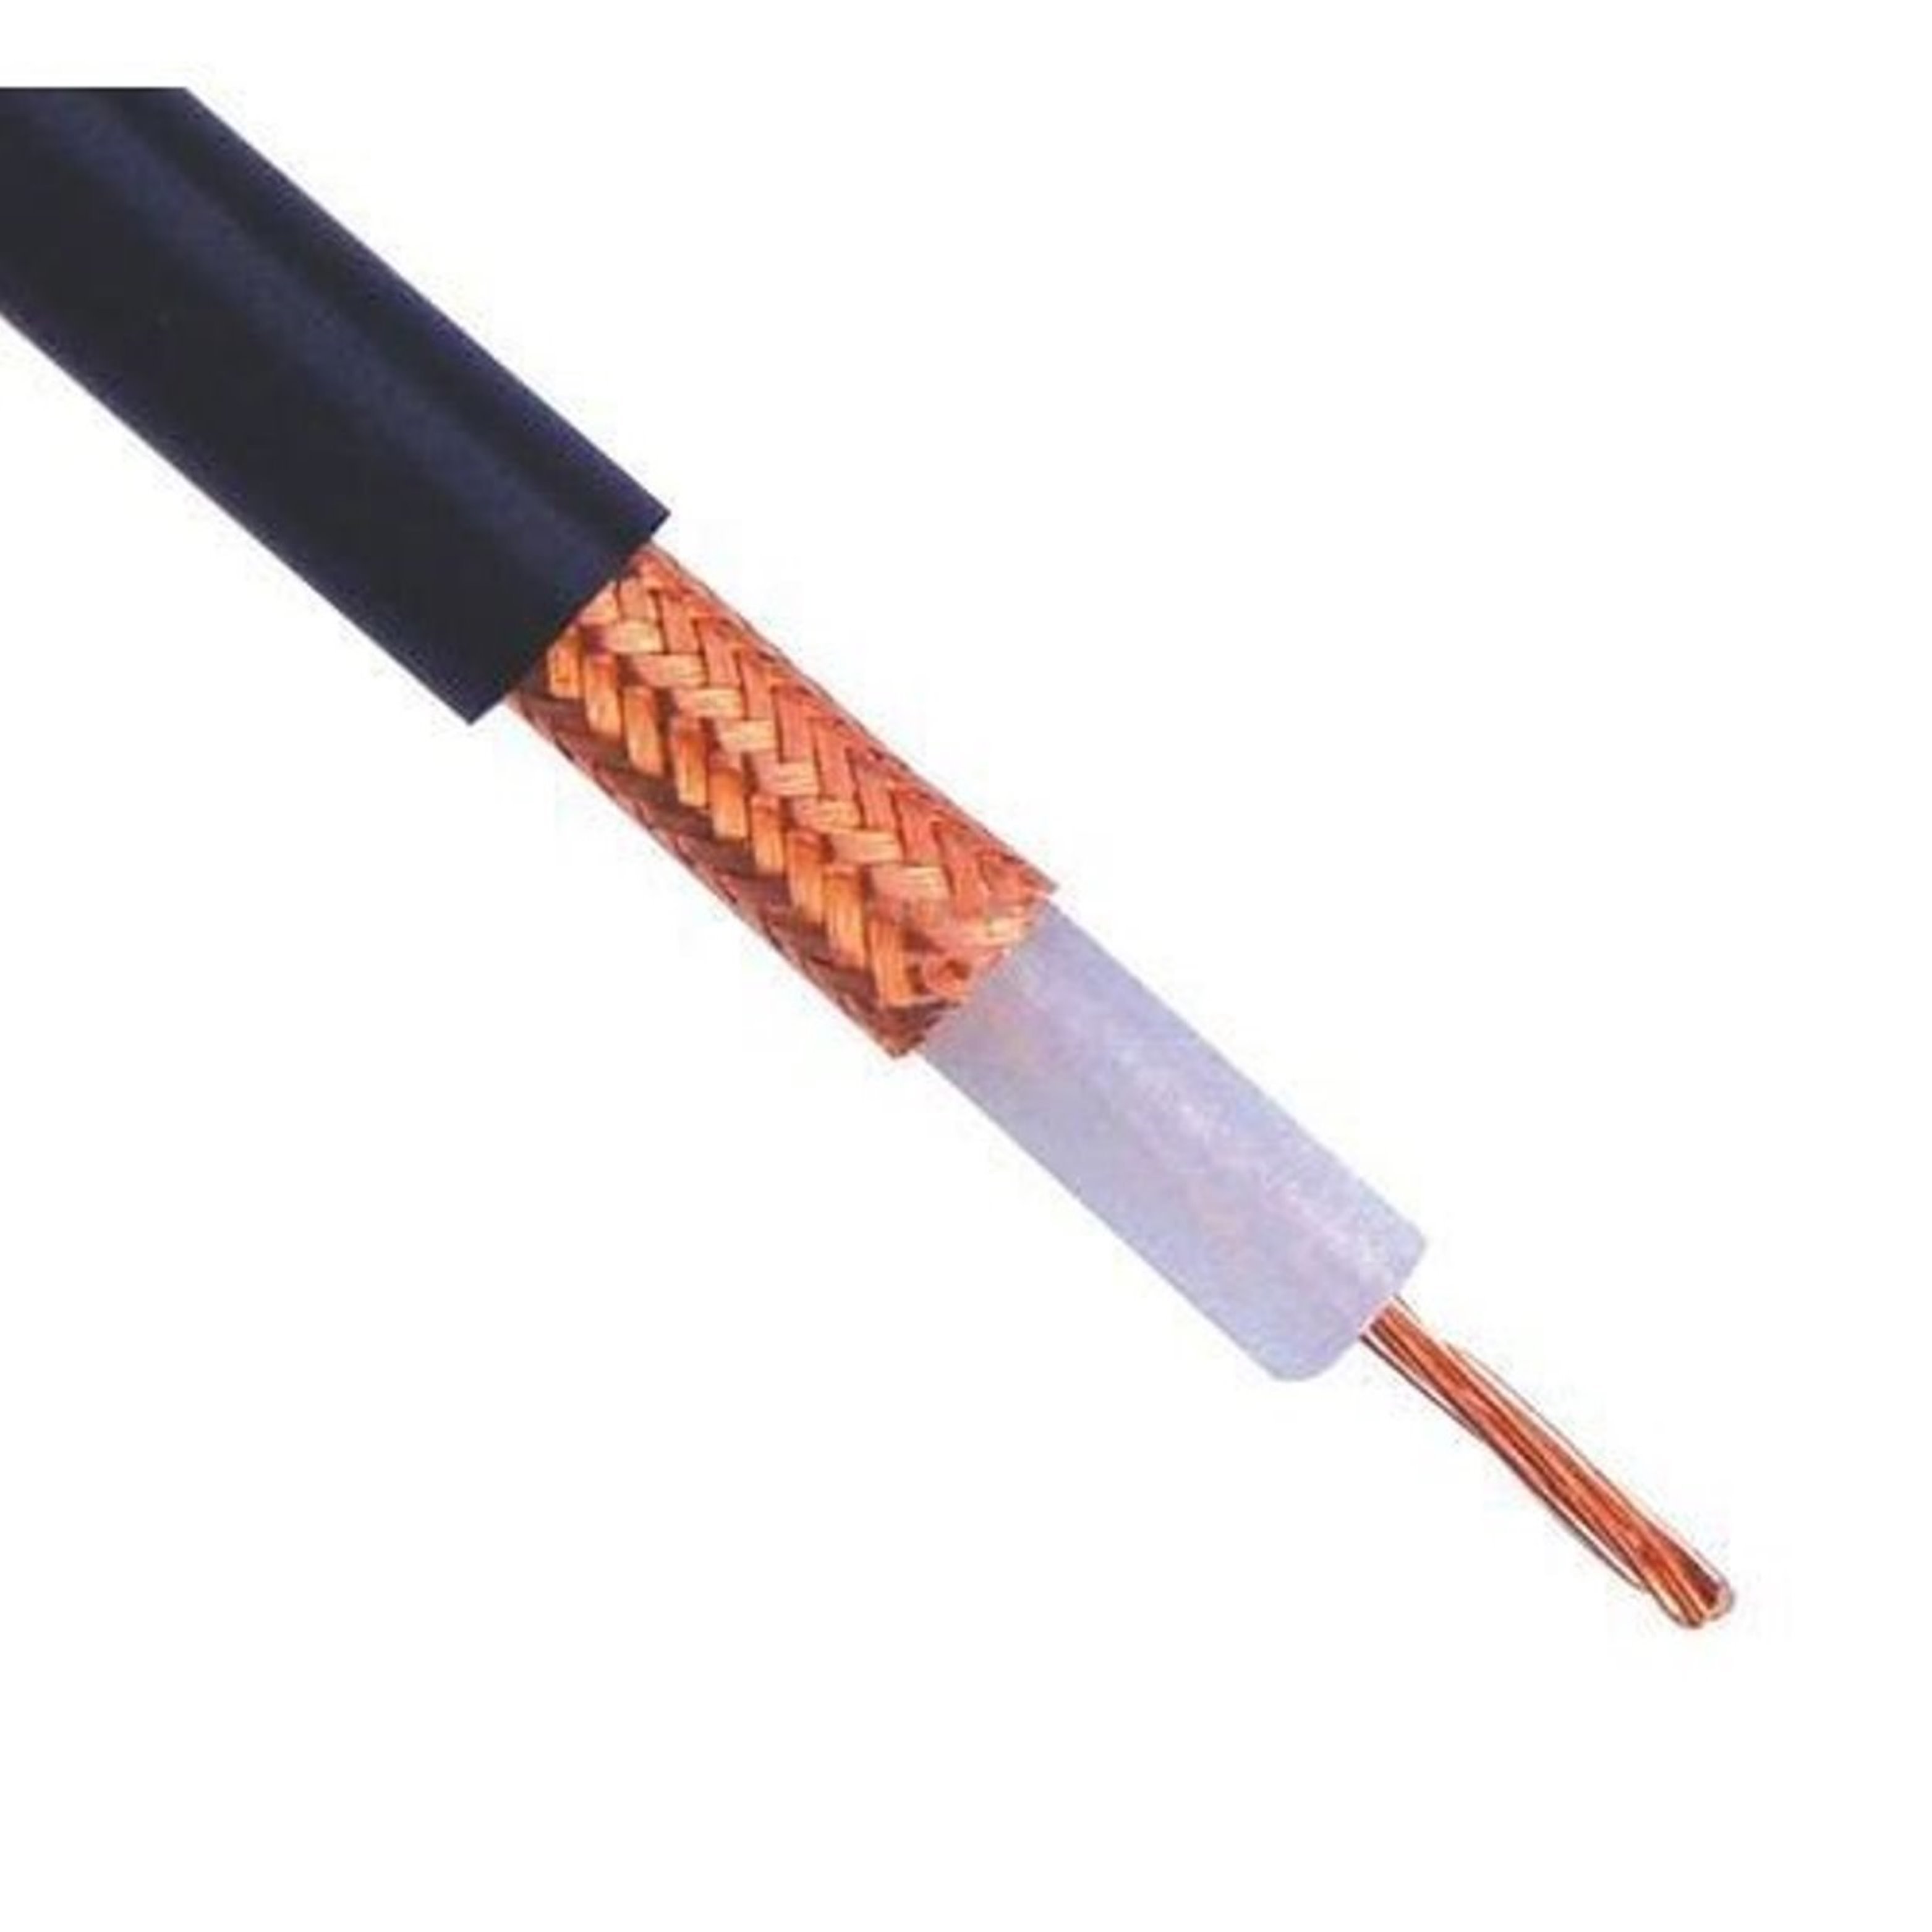 HLF 240 Coaxial Cable Cable